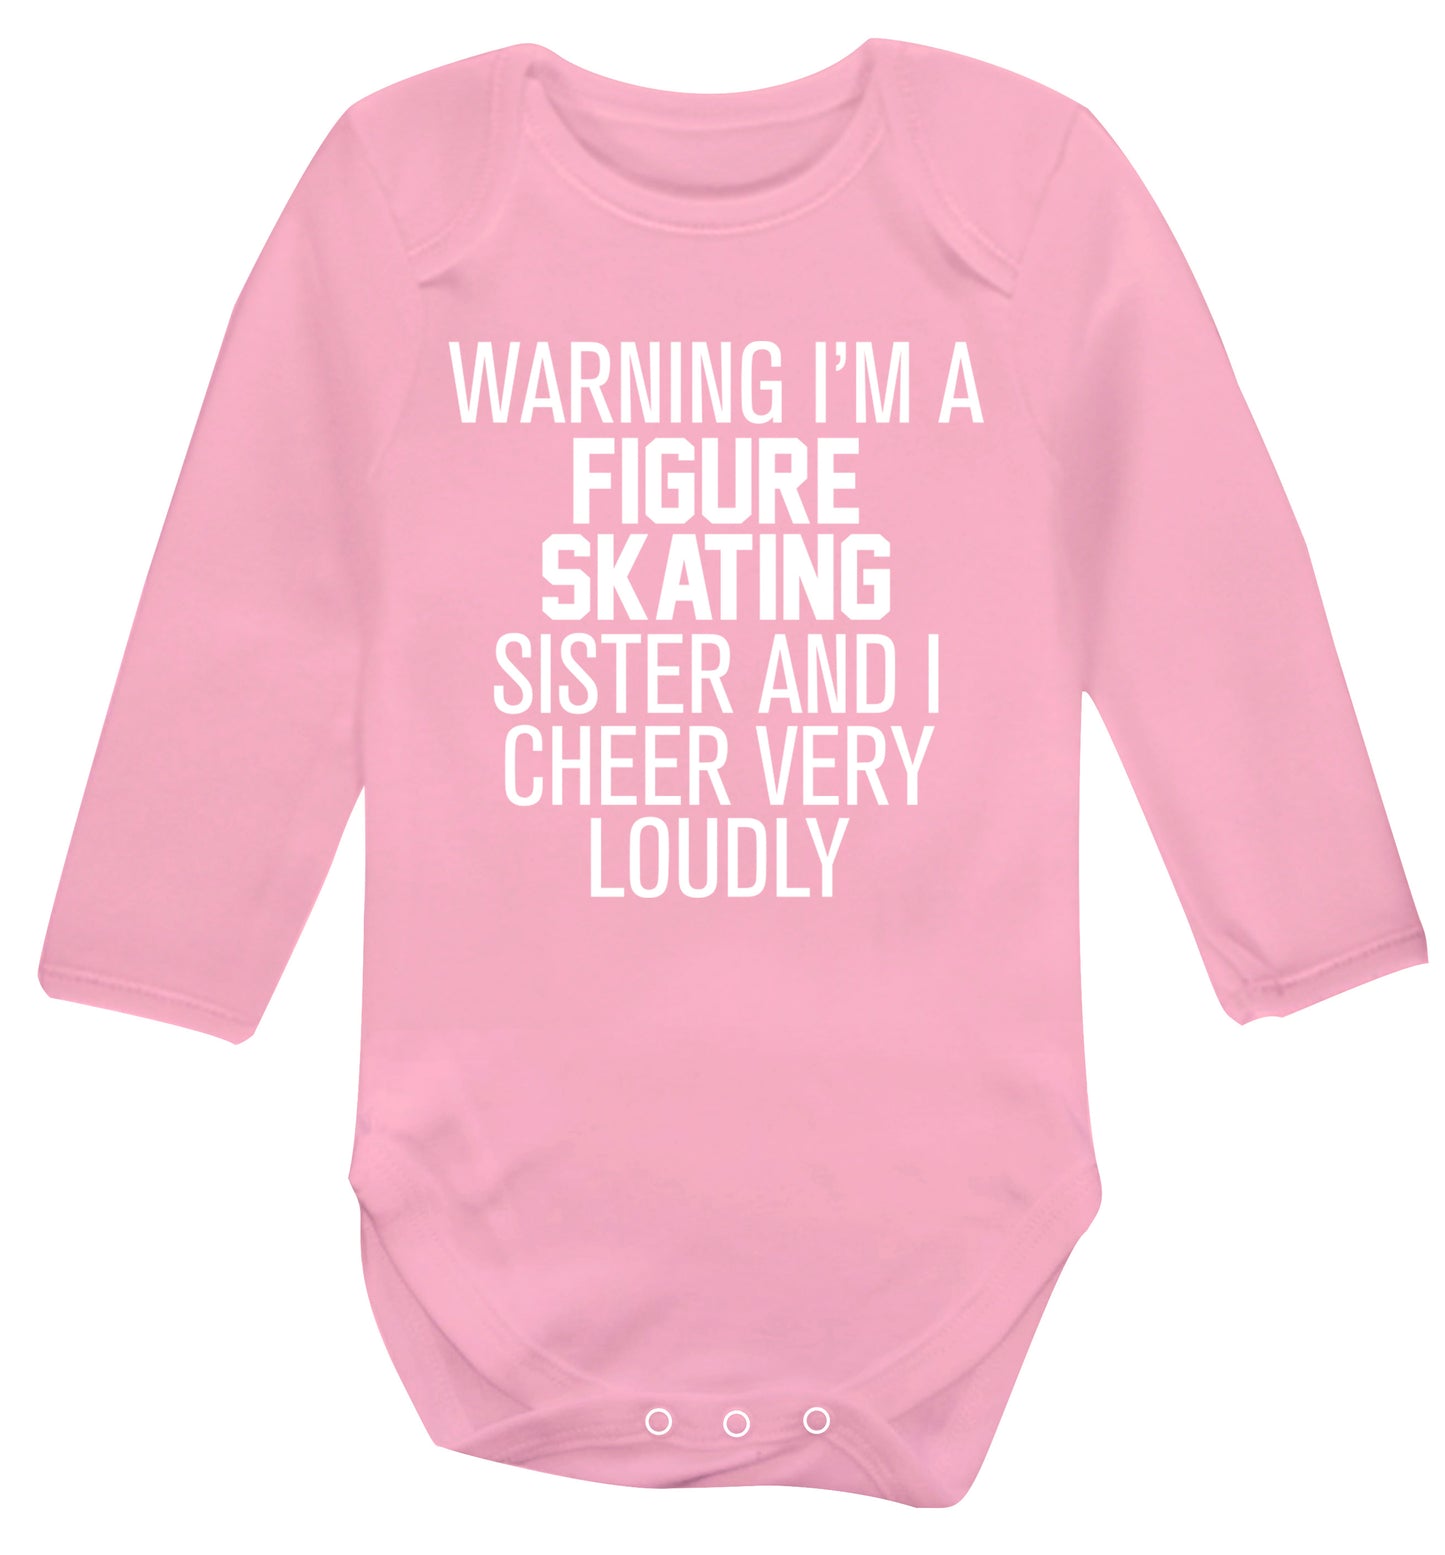 Warning I'm a figure skating sister and I cheer very loudly Baby Vest long sleeved pale pink 6-12 months